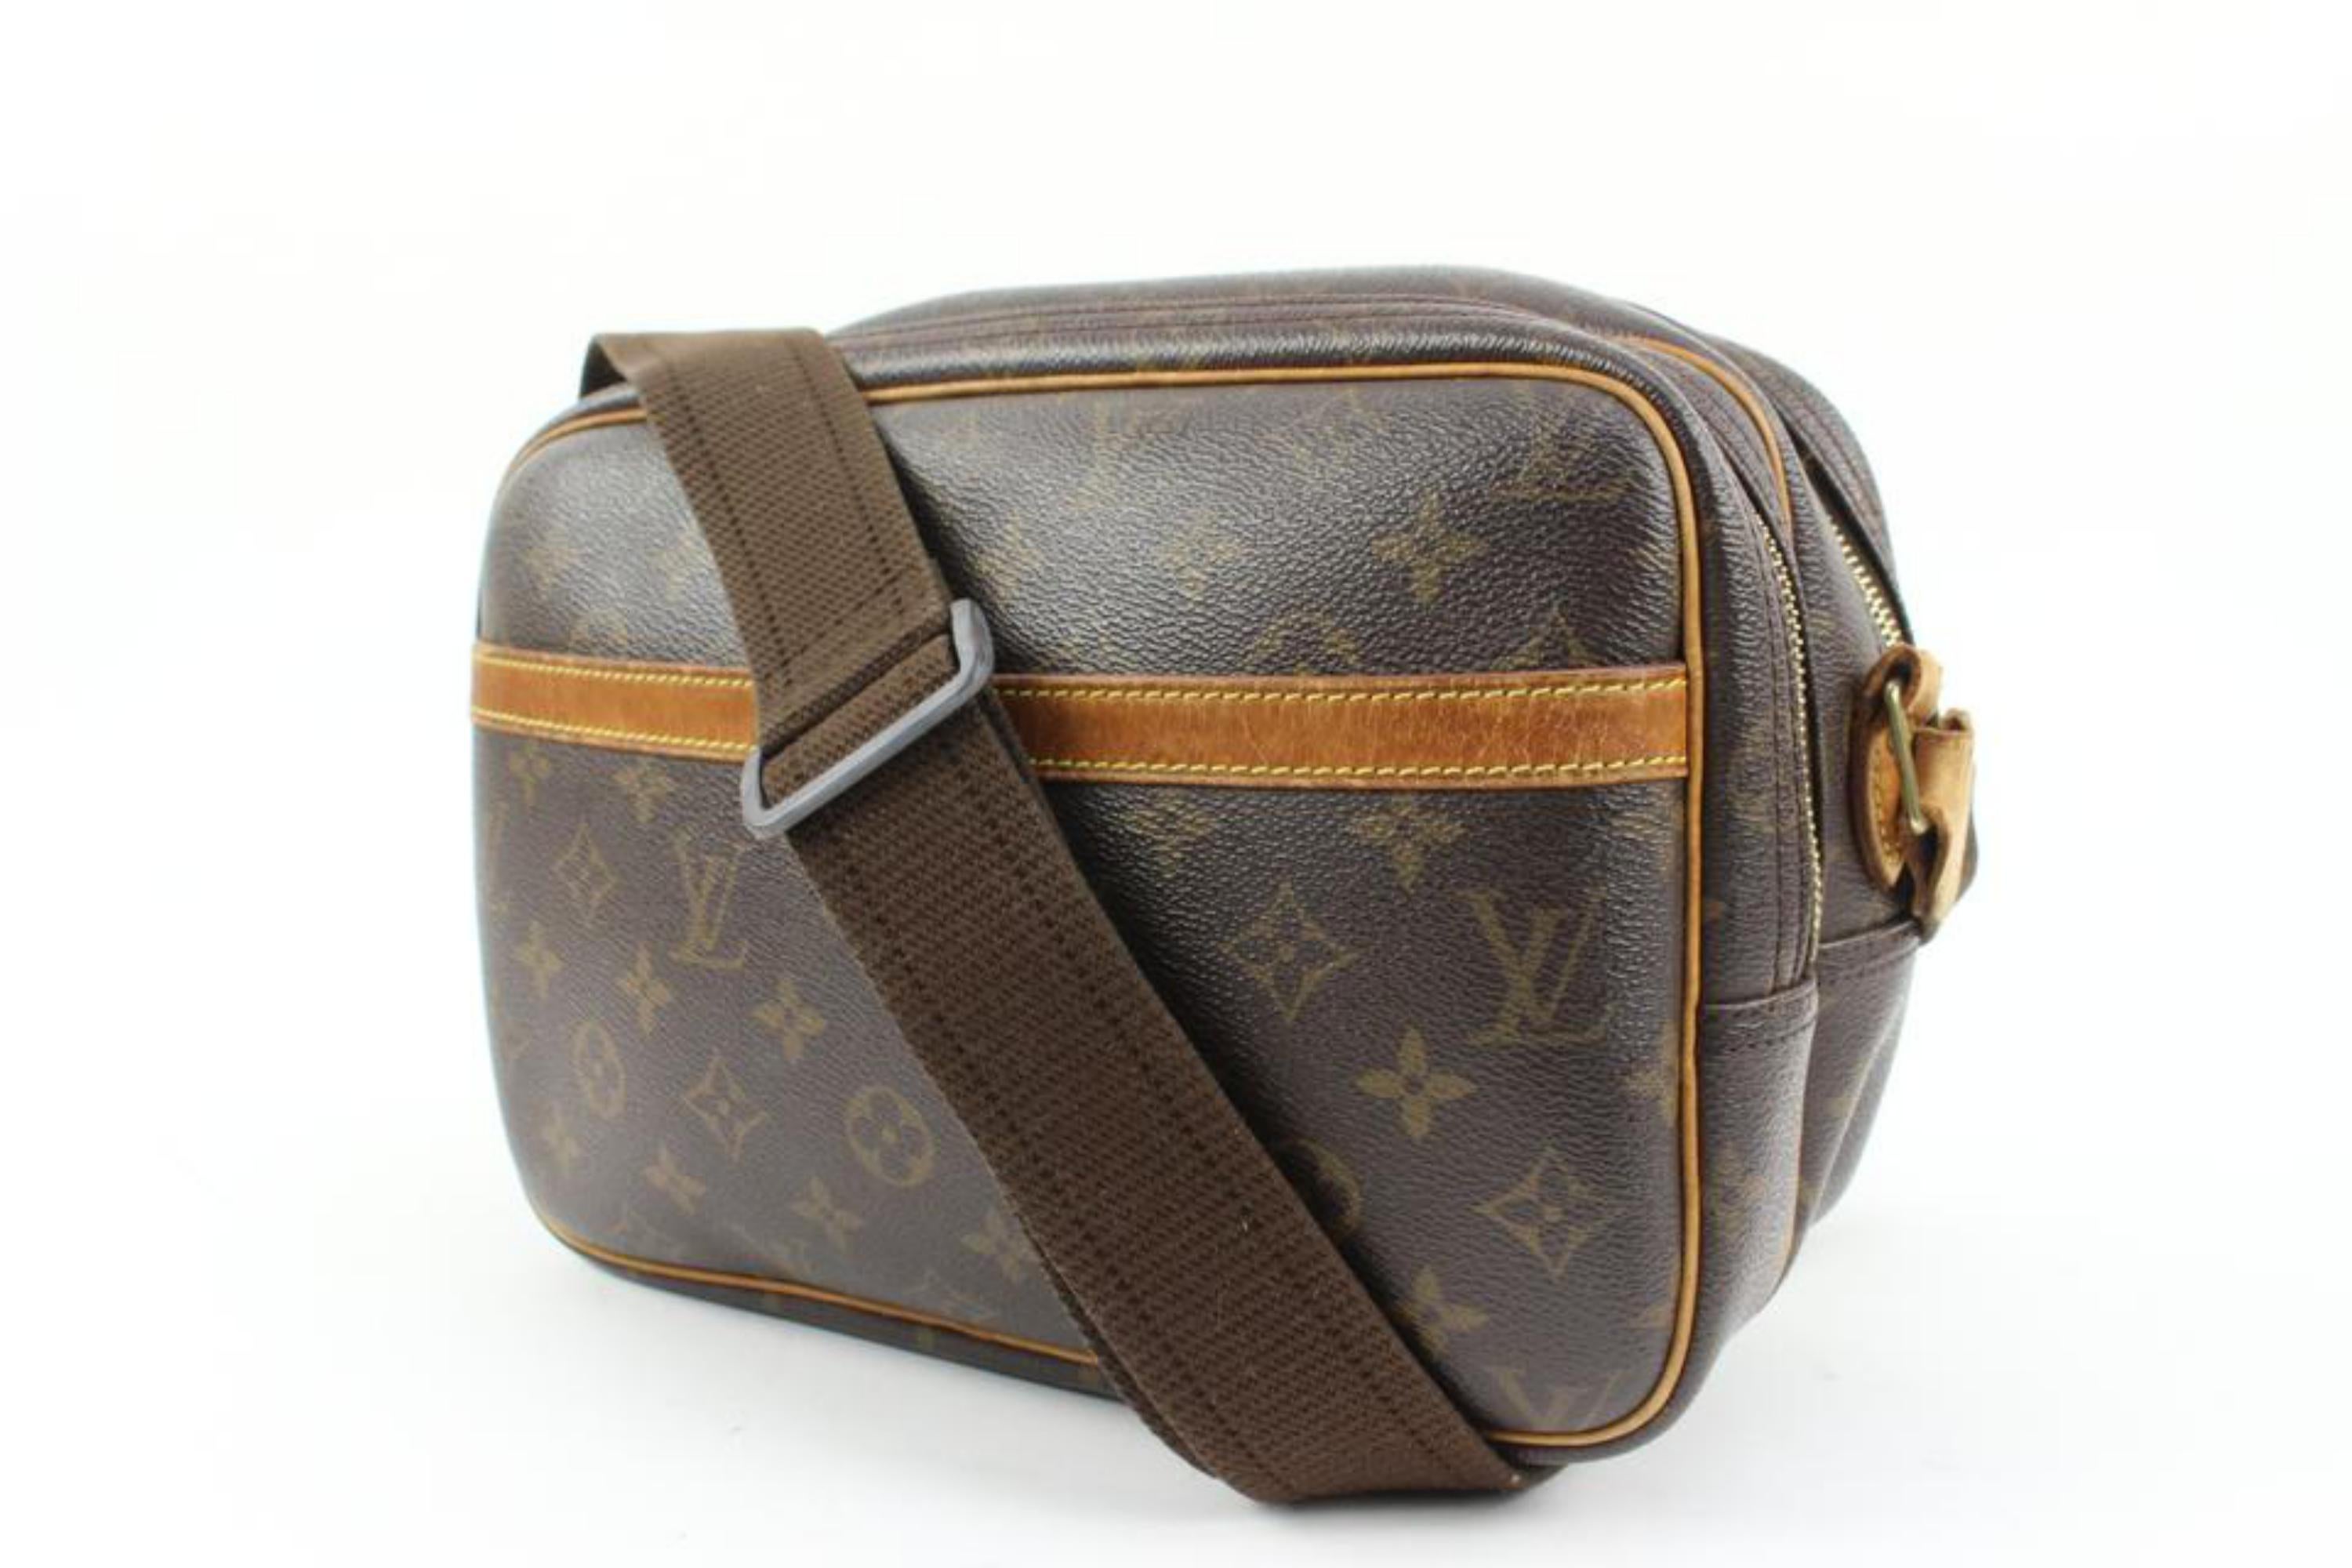 Louis Vuitton Discontinued Monogram Reporter PM Crossbody Bag s29lv25
Date Code/Serial Number: SP0021
Made In: France
Measurements: Length:  11